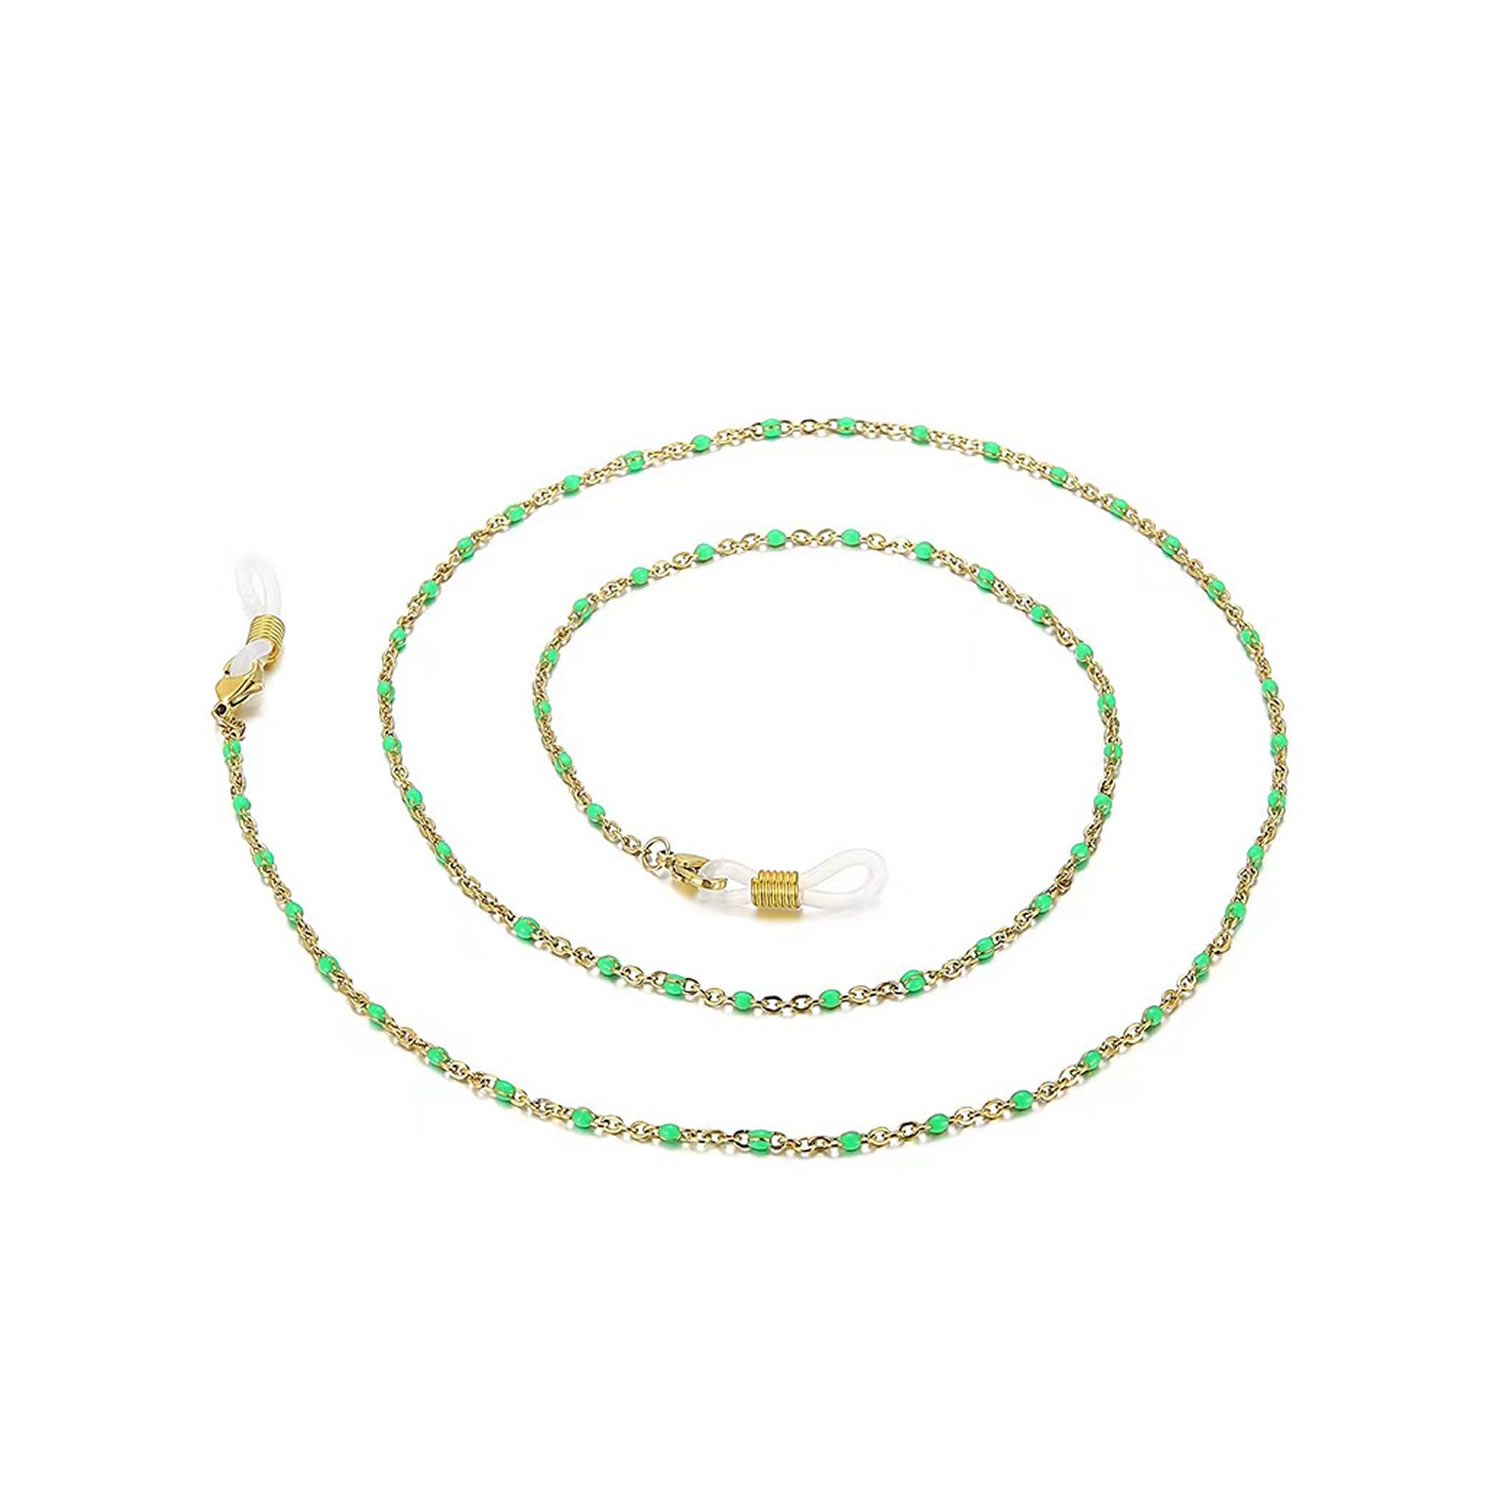 2mm green color enamelled chains glasses necklace